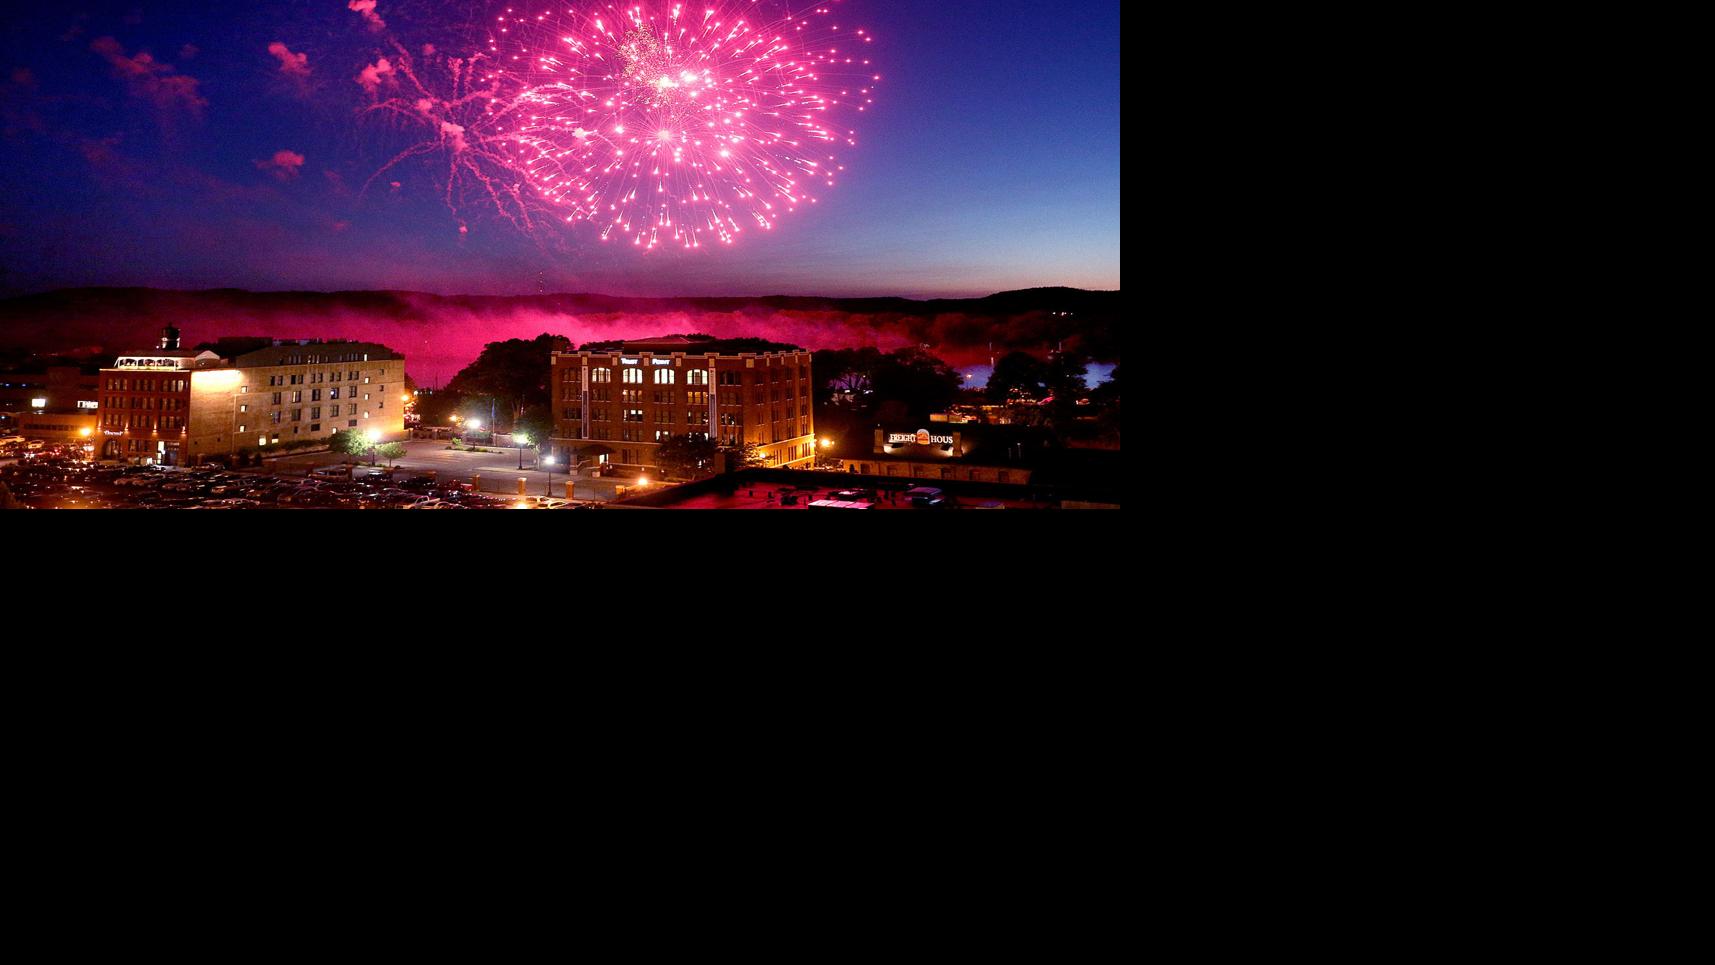 Some fireworks still on in La Crosse area this Fourth of July, guidance